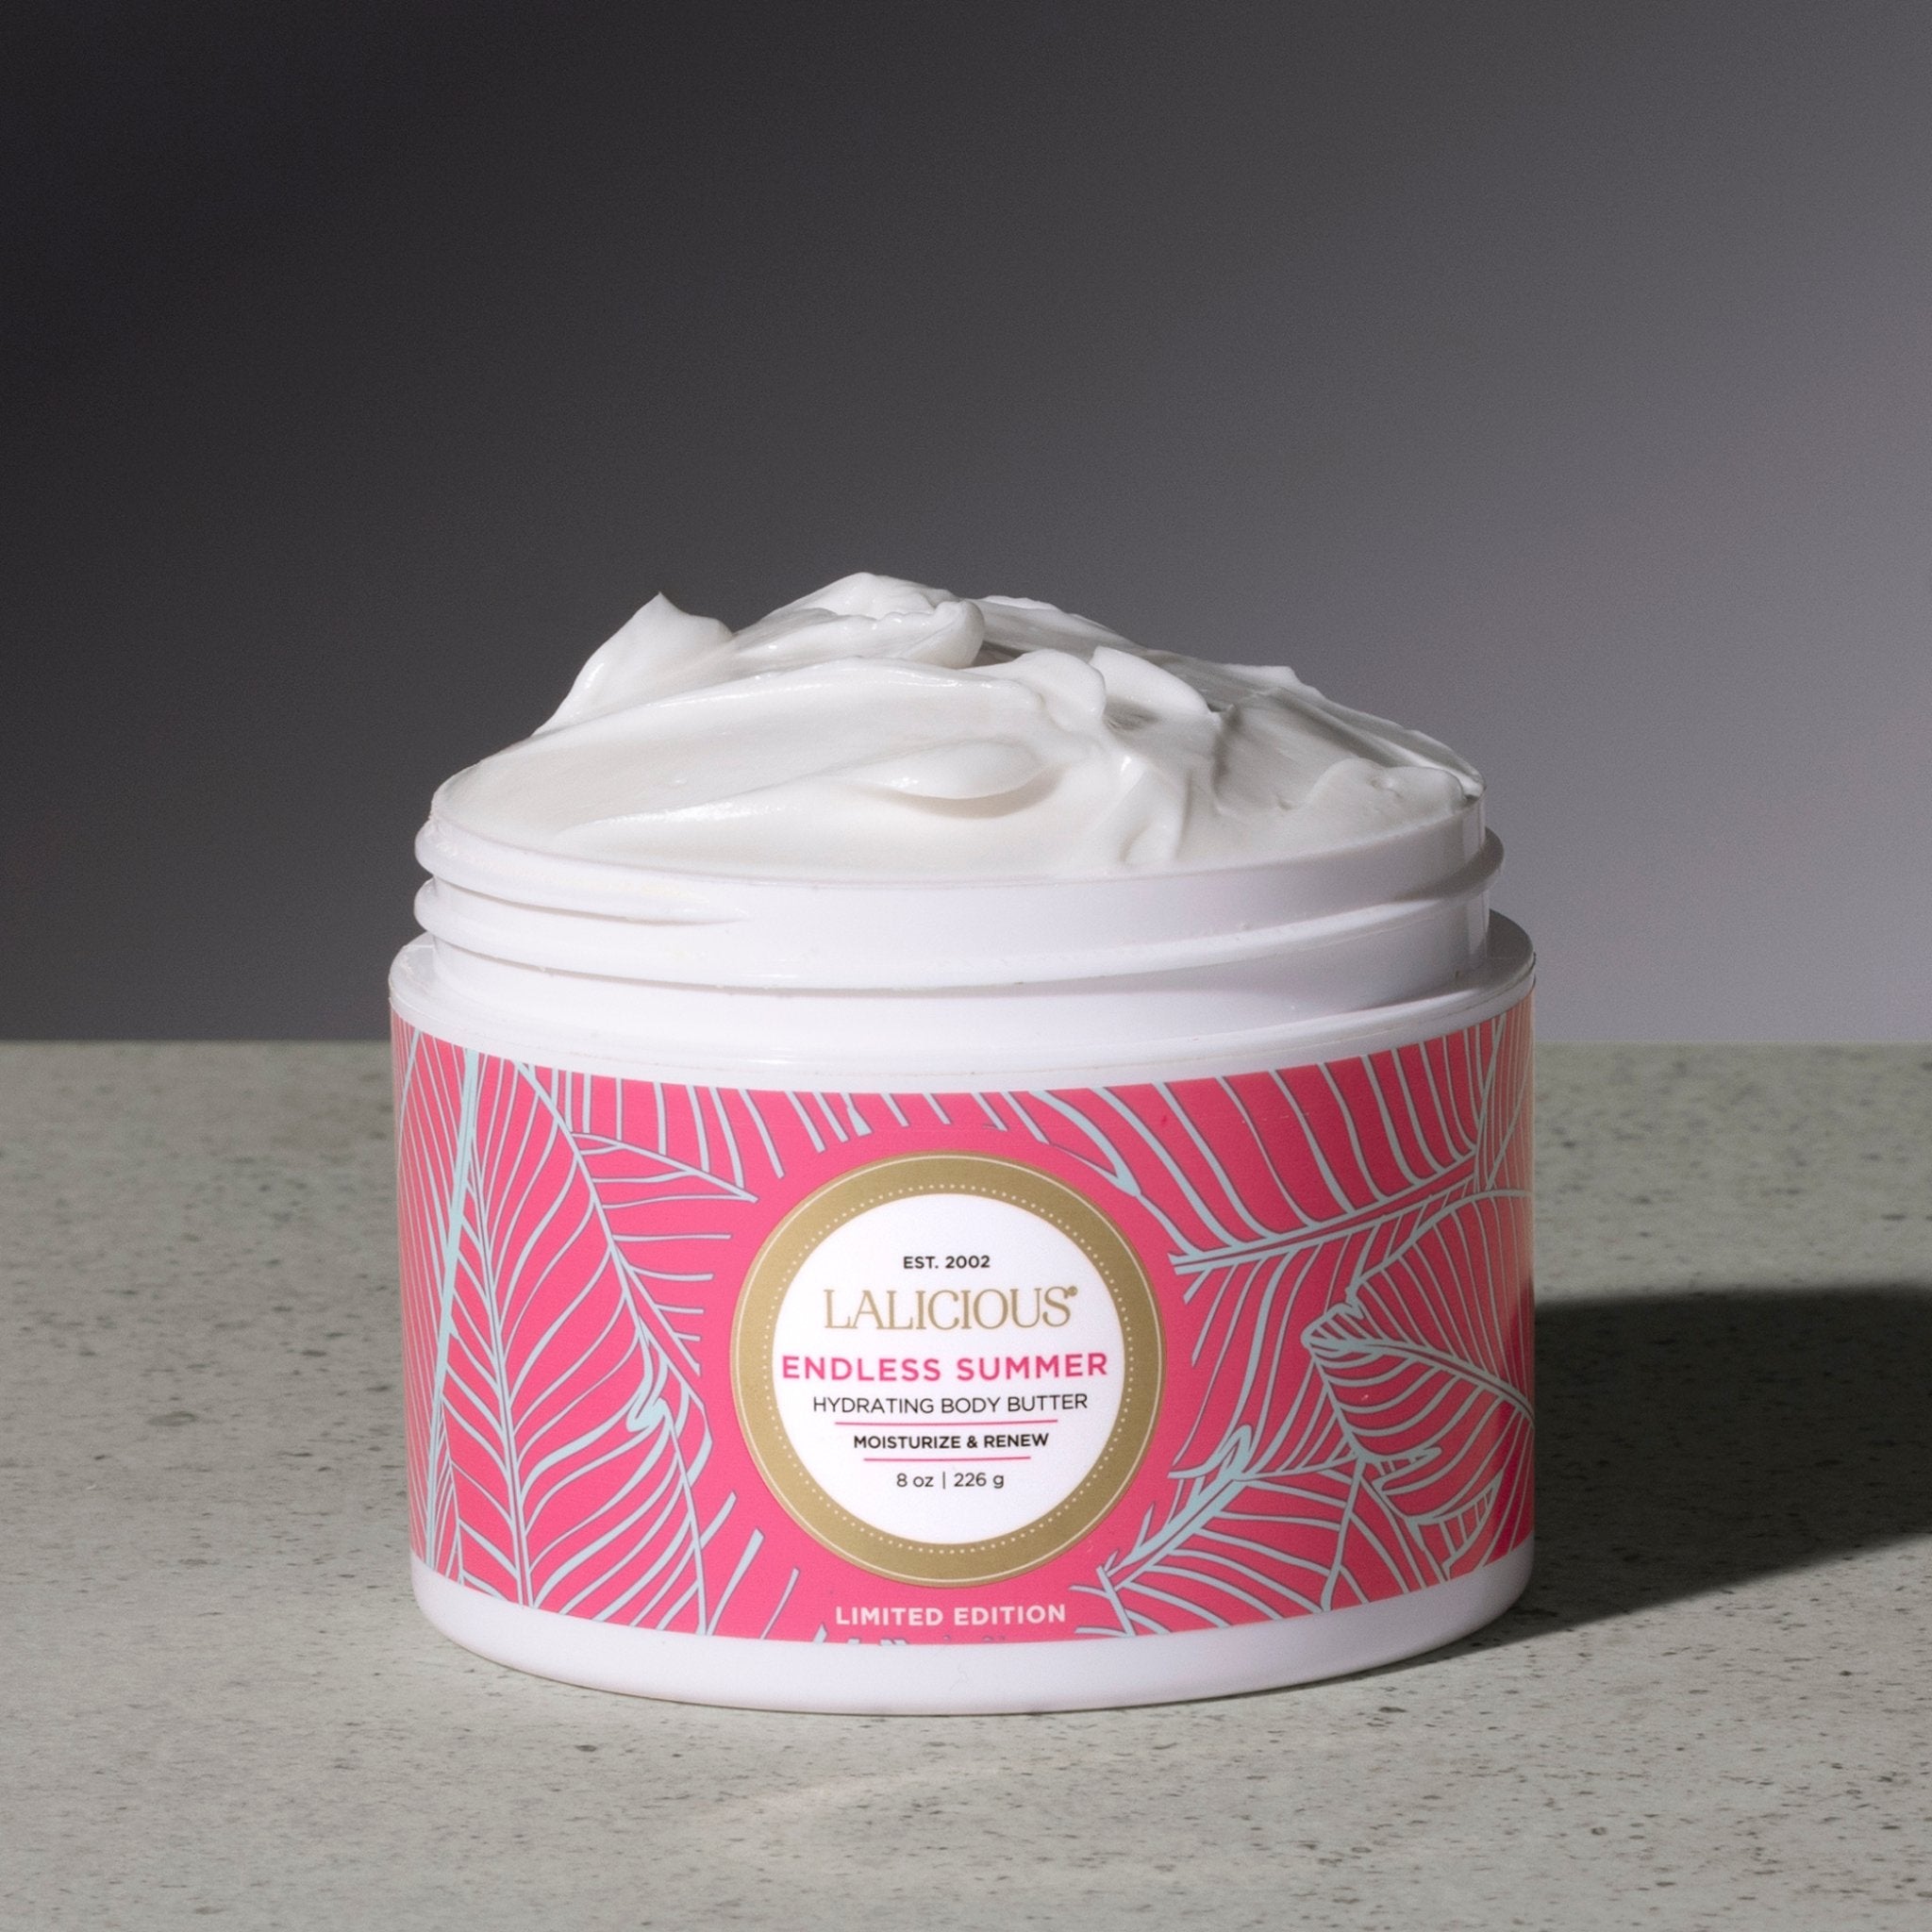 Exotic Fruit Body Butter - Bath & Body Gifting from I Love Cosmetics UK